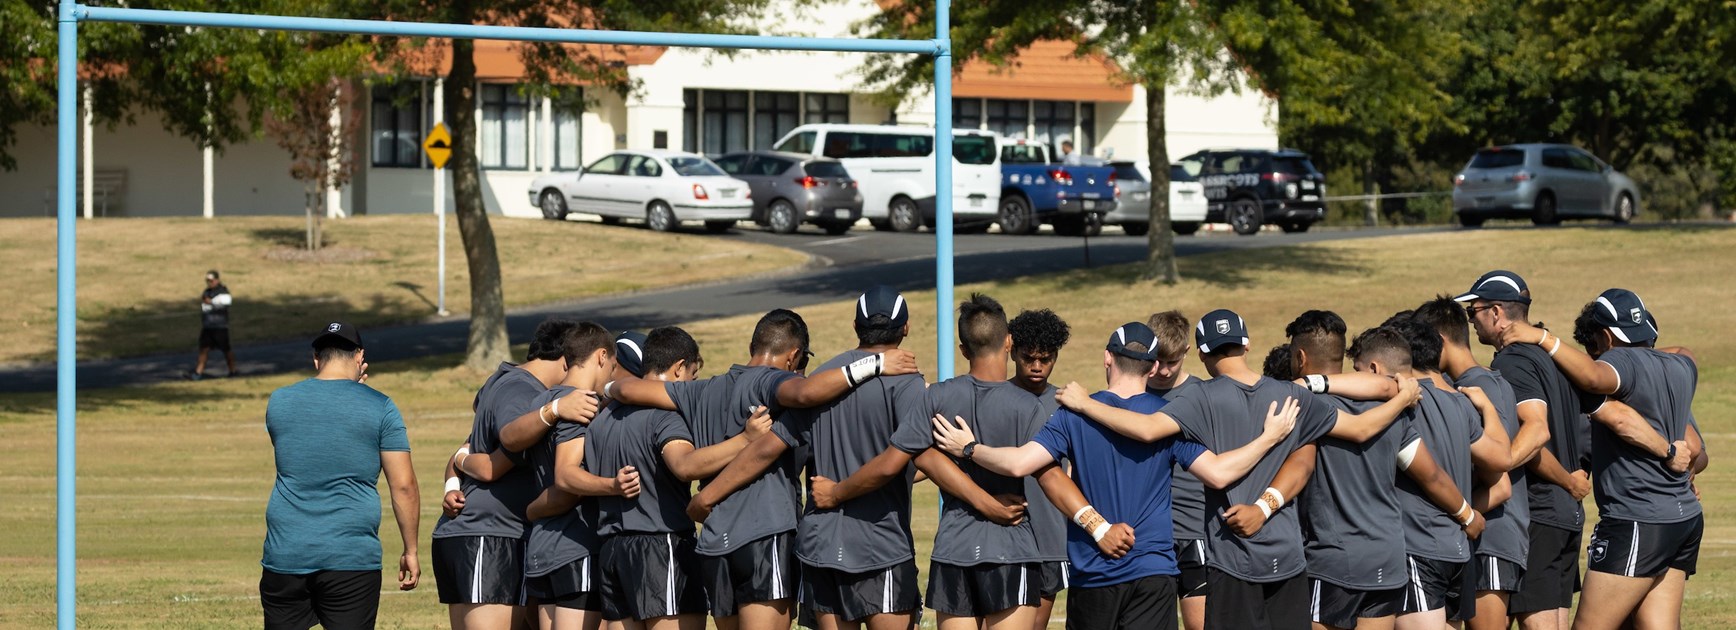 NZRL competitions on hold